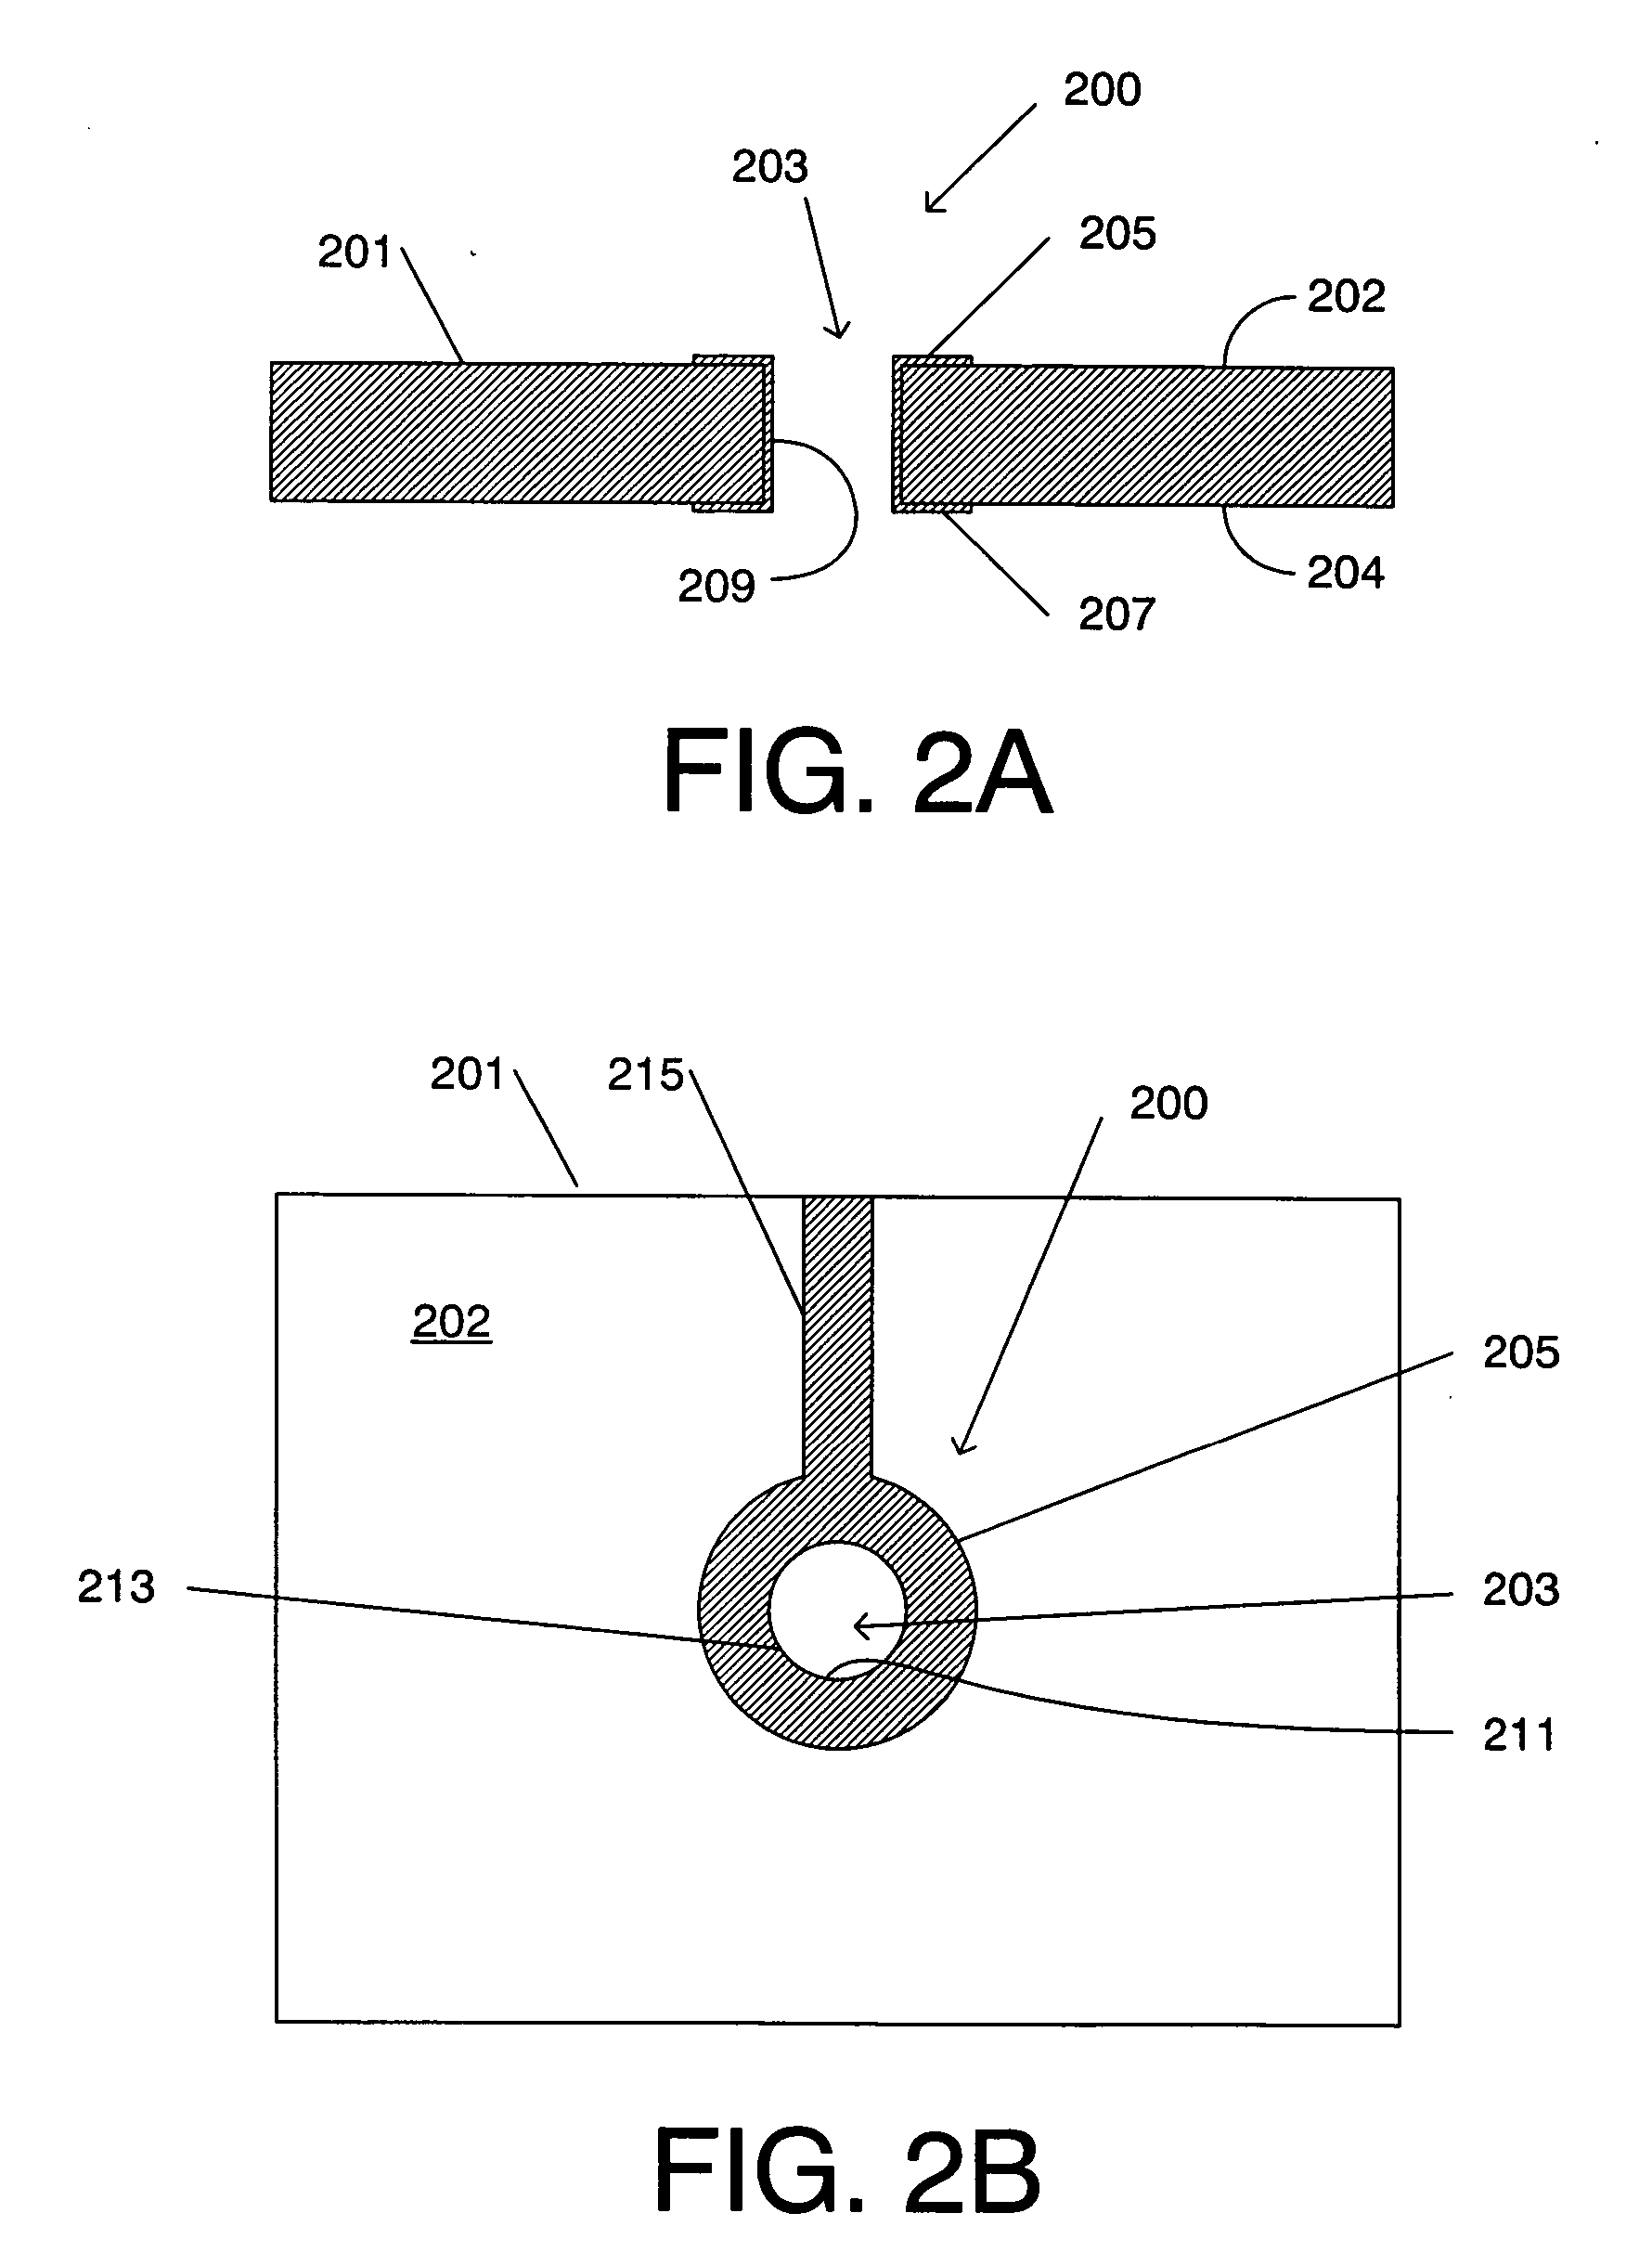 Drill hole inspection method for printed circuit board fabrication